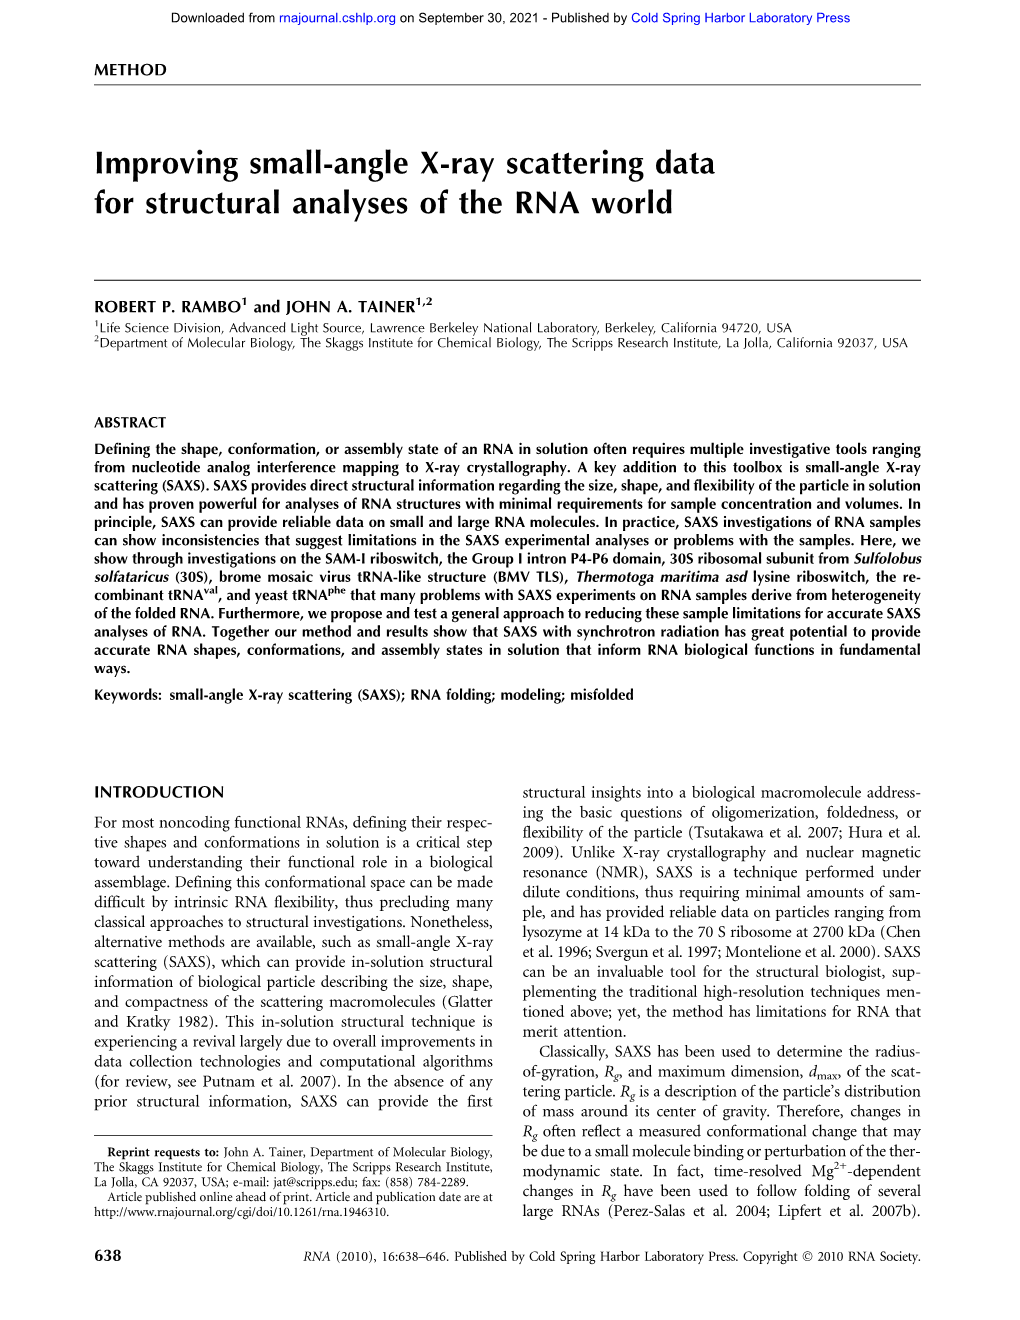 Improving Small-Angle X-Ray Scattering Data for Structural Analyses of the RNA World